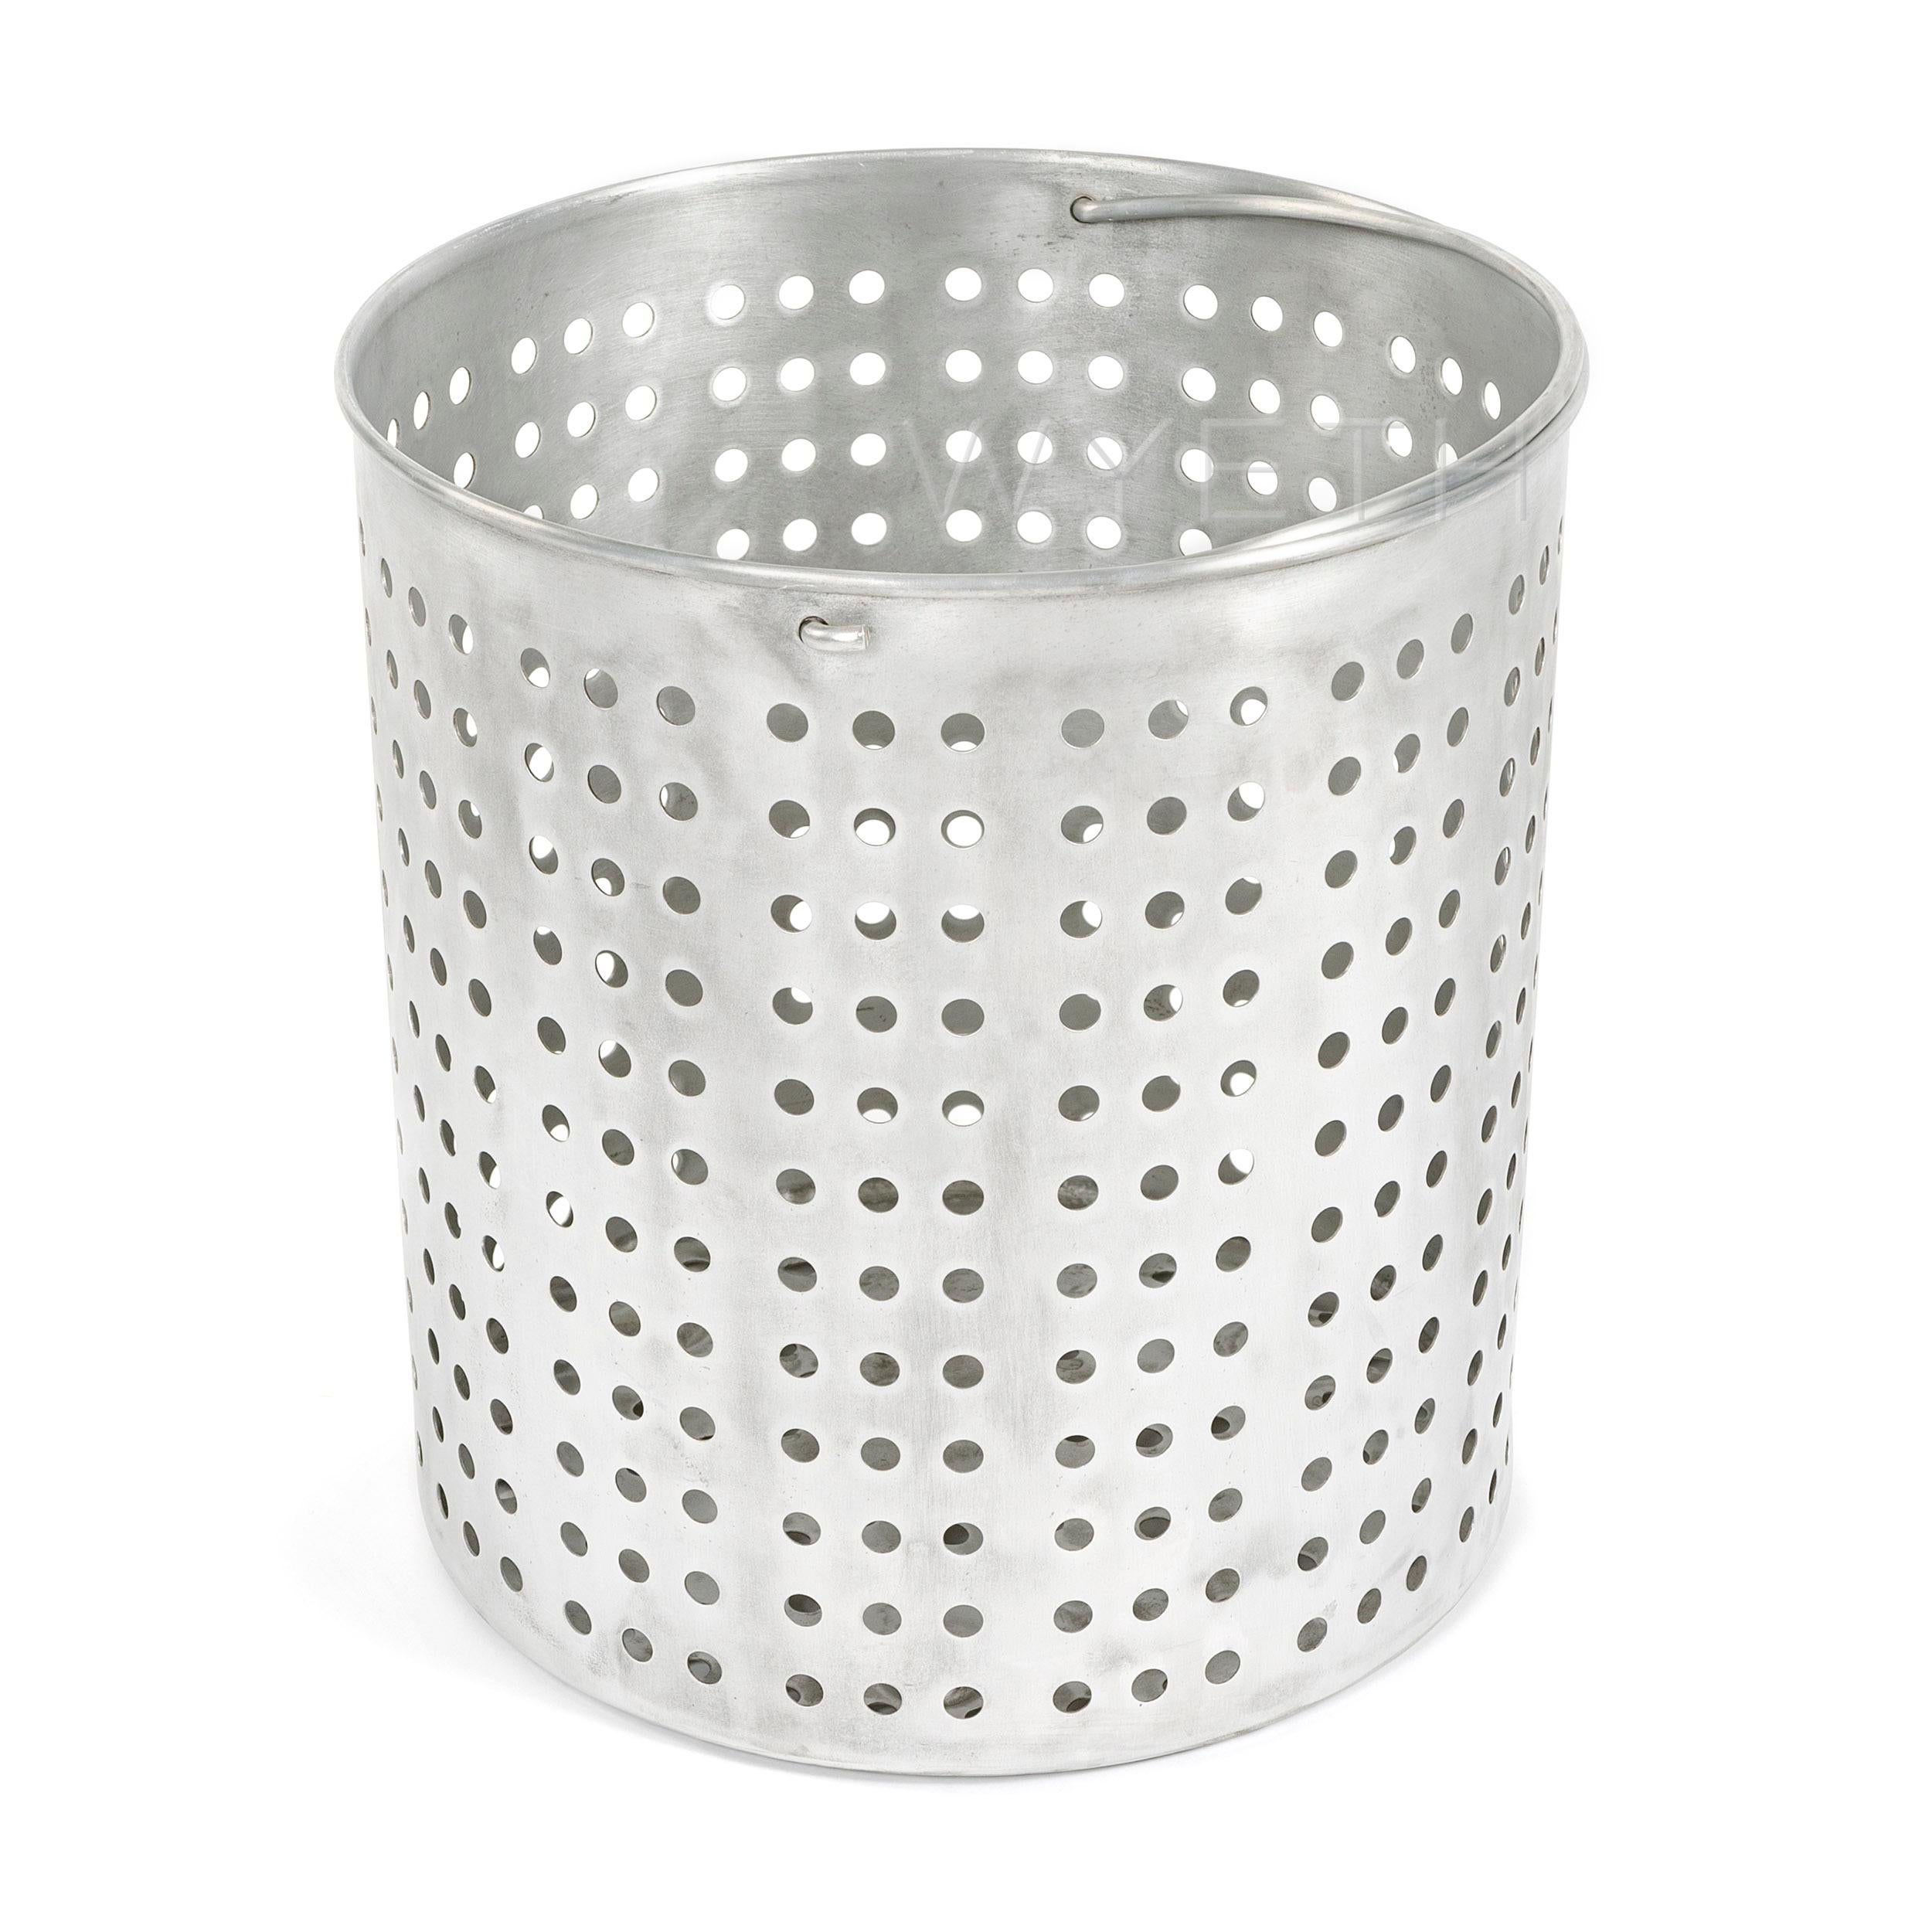 A large scaled spun and machined aluminum perforated basket with pivoting handle.